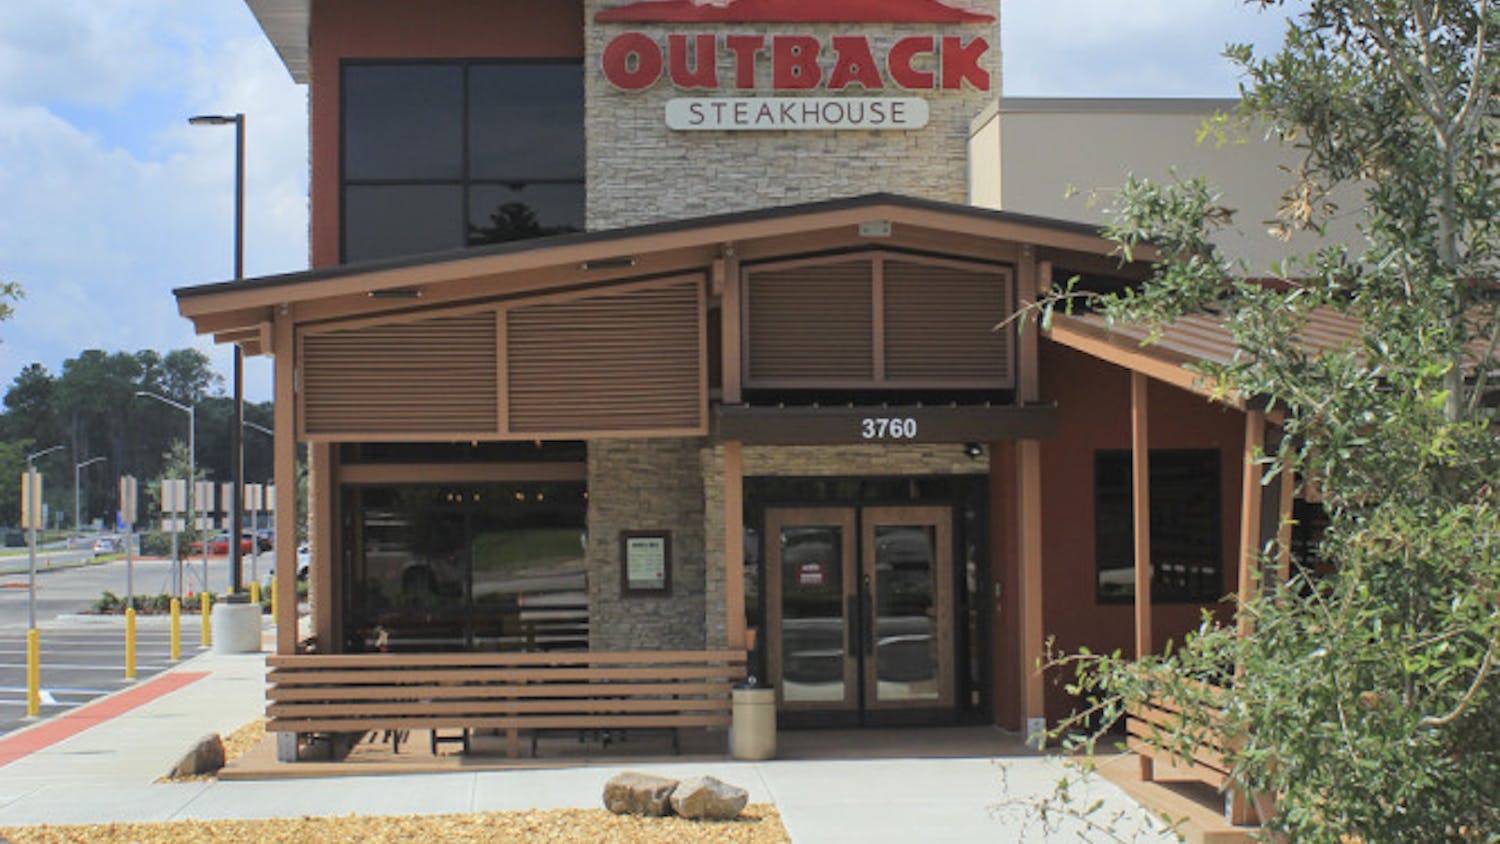 Outback Steakhouse will open its new building at 3770 SW Archer Road on Wednesday.